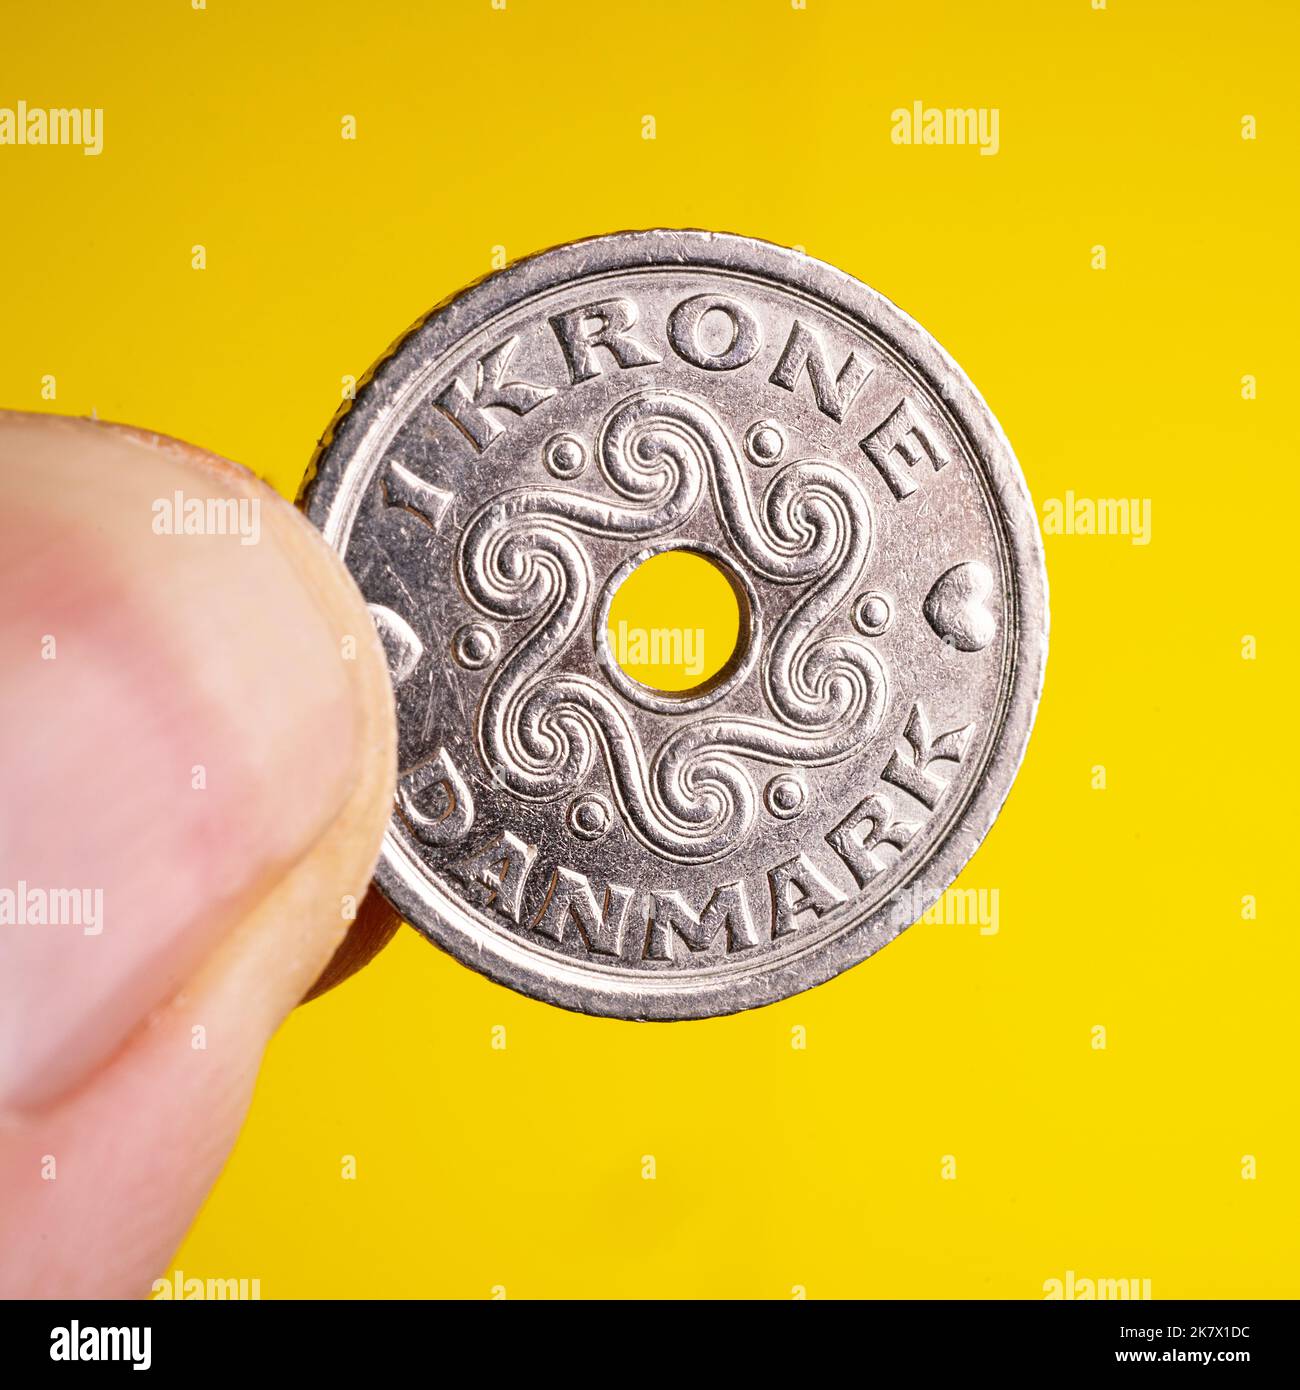 a Danish krone coin between the fingers of the hand Stock Photo